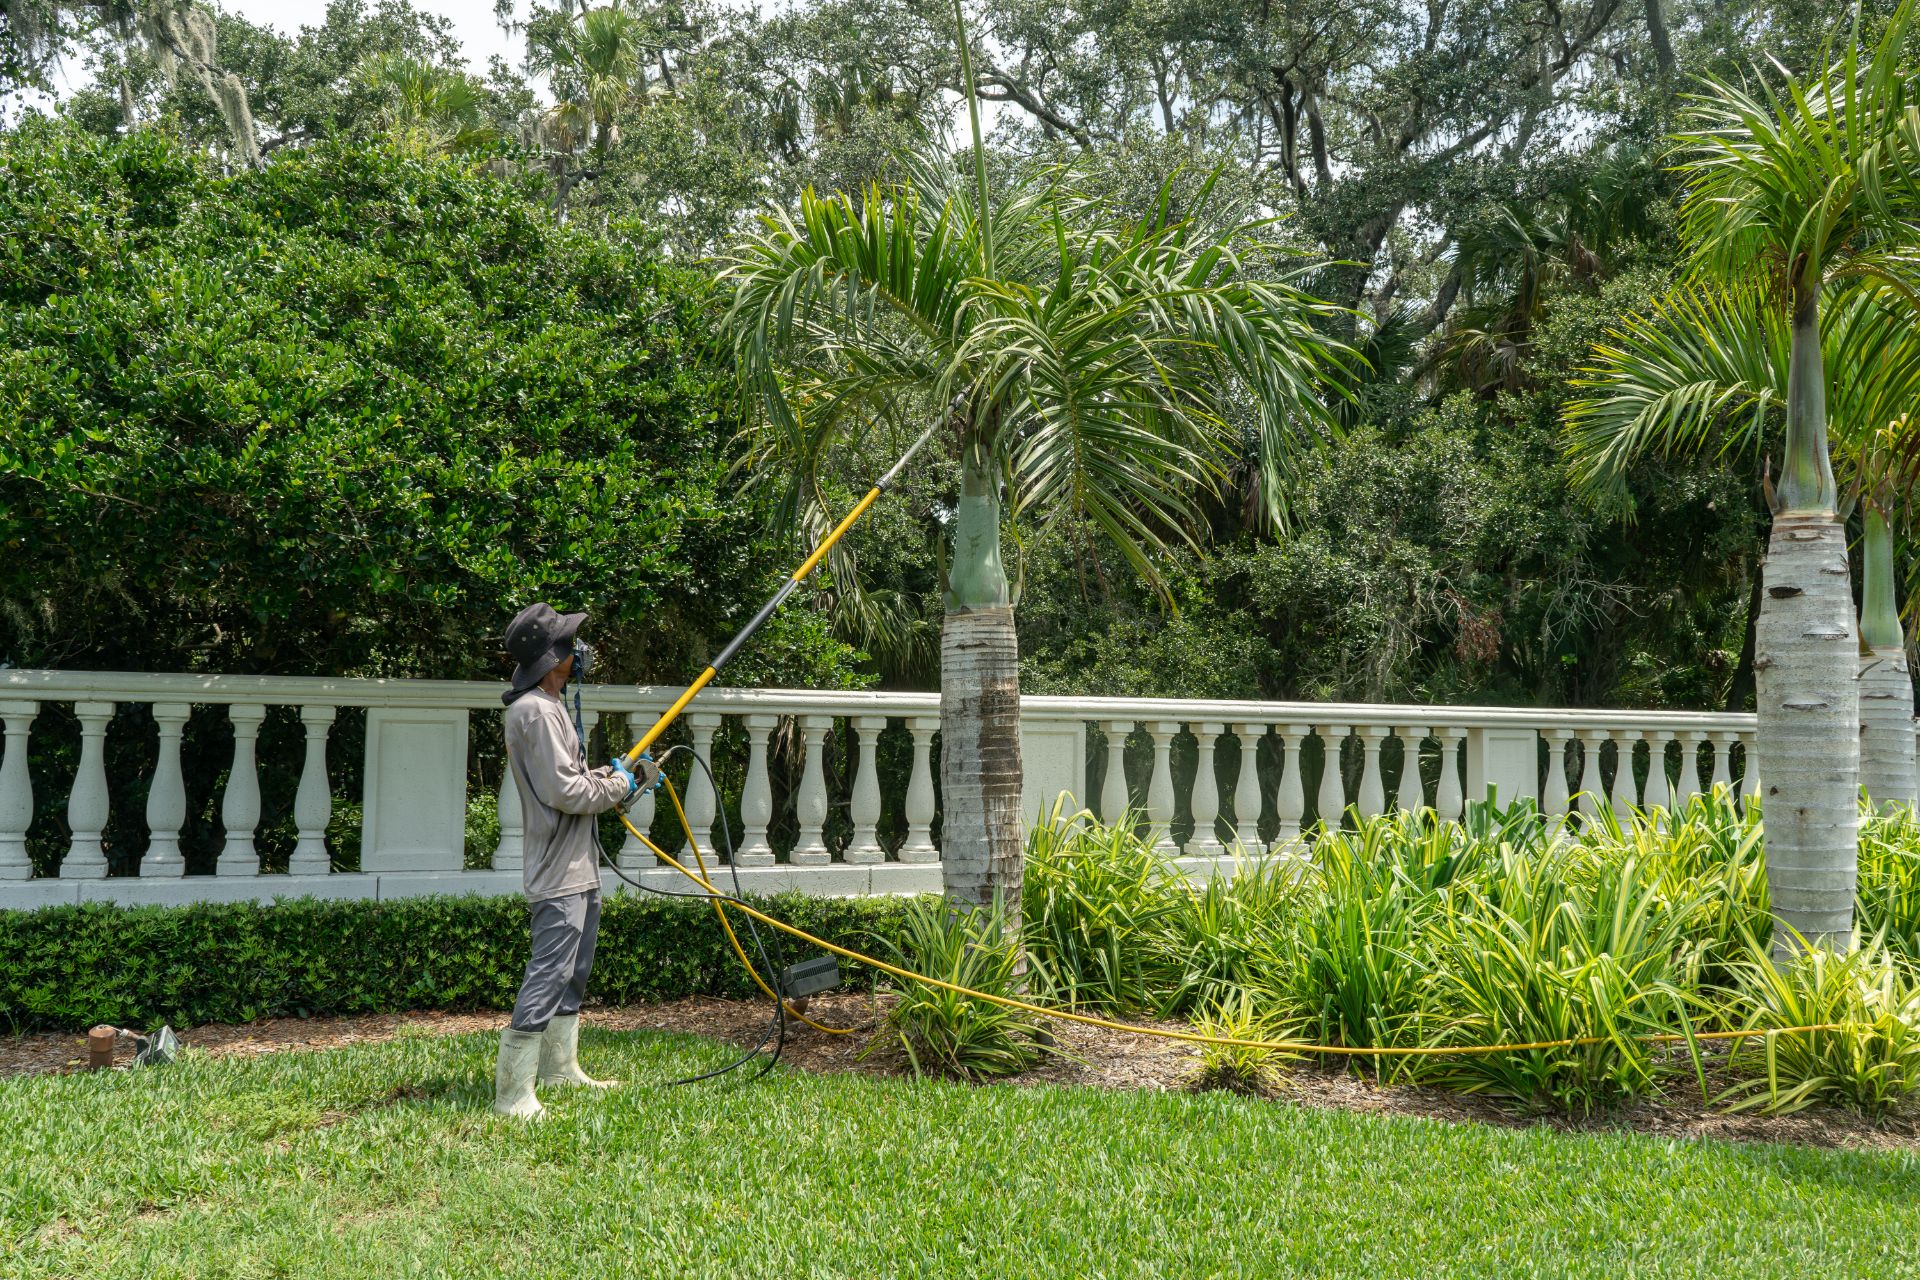 A GreenEdge staff member carefully spraying a tree for optimal health in Sarasota. Our skilled team administers targeted treatments to combat pests or diseases, promoting the well-being and longevity of your trees. Trust GreenEdge for professional tree health care and effective spraying solutions.